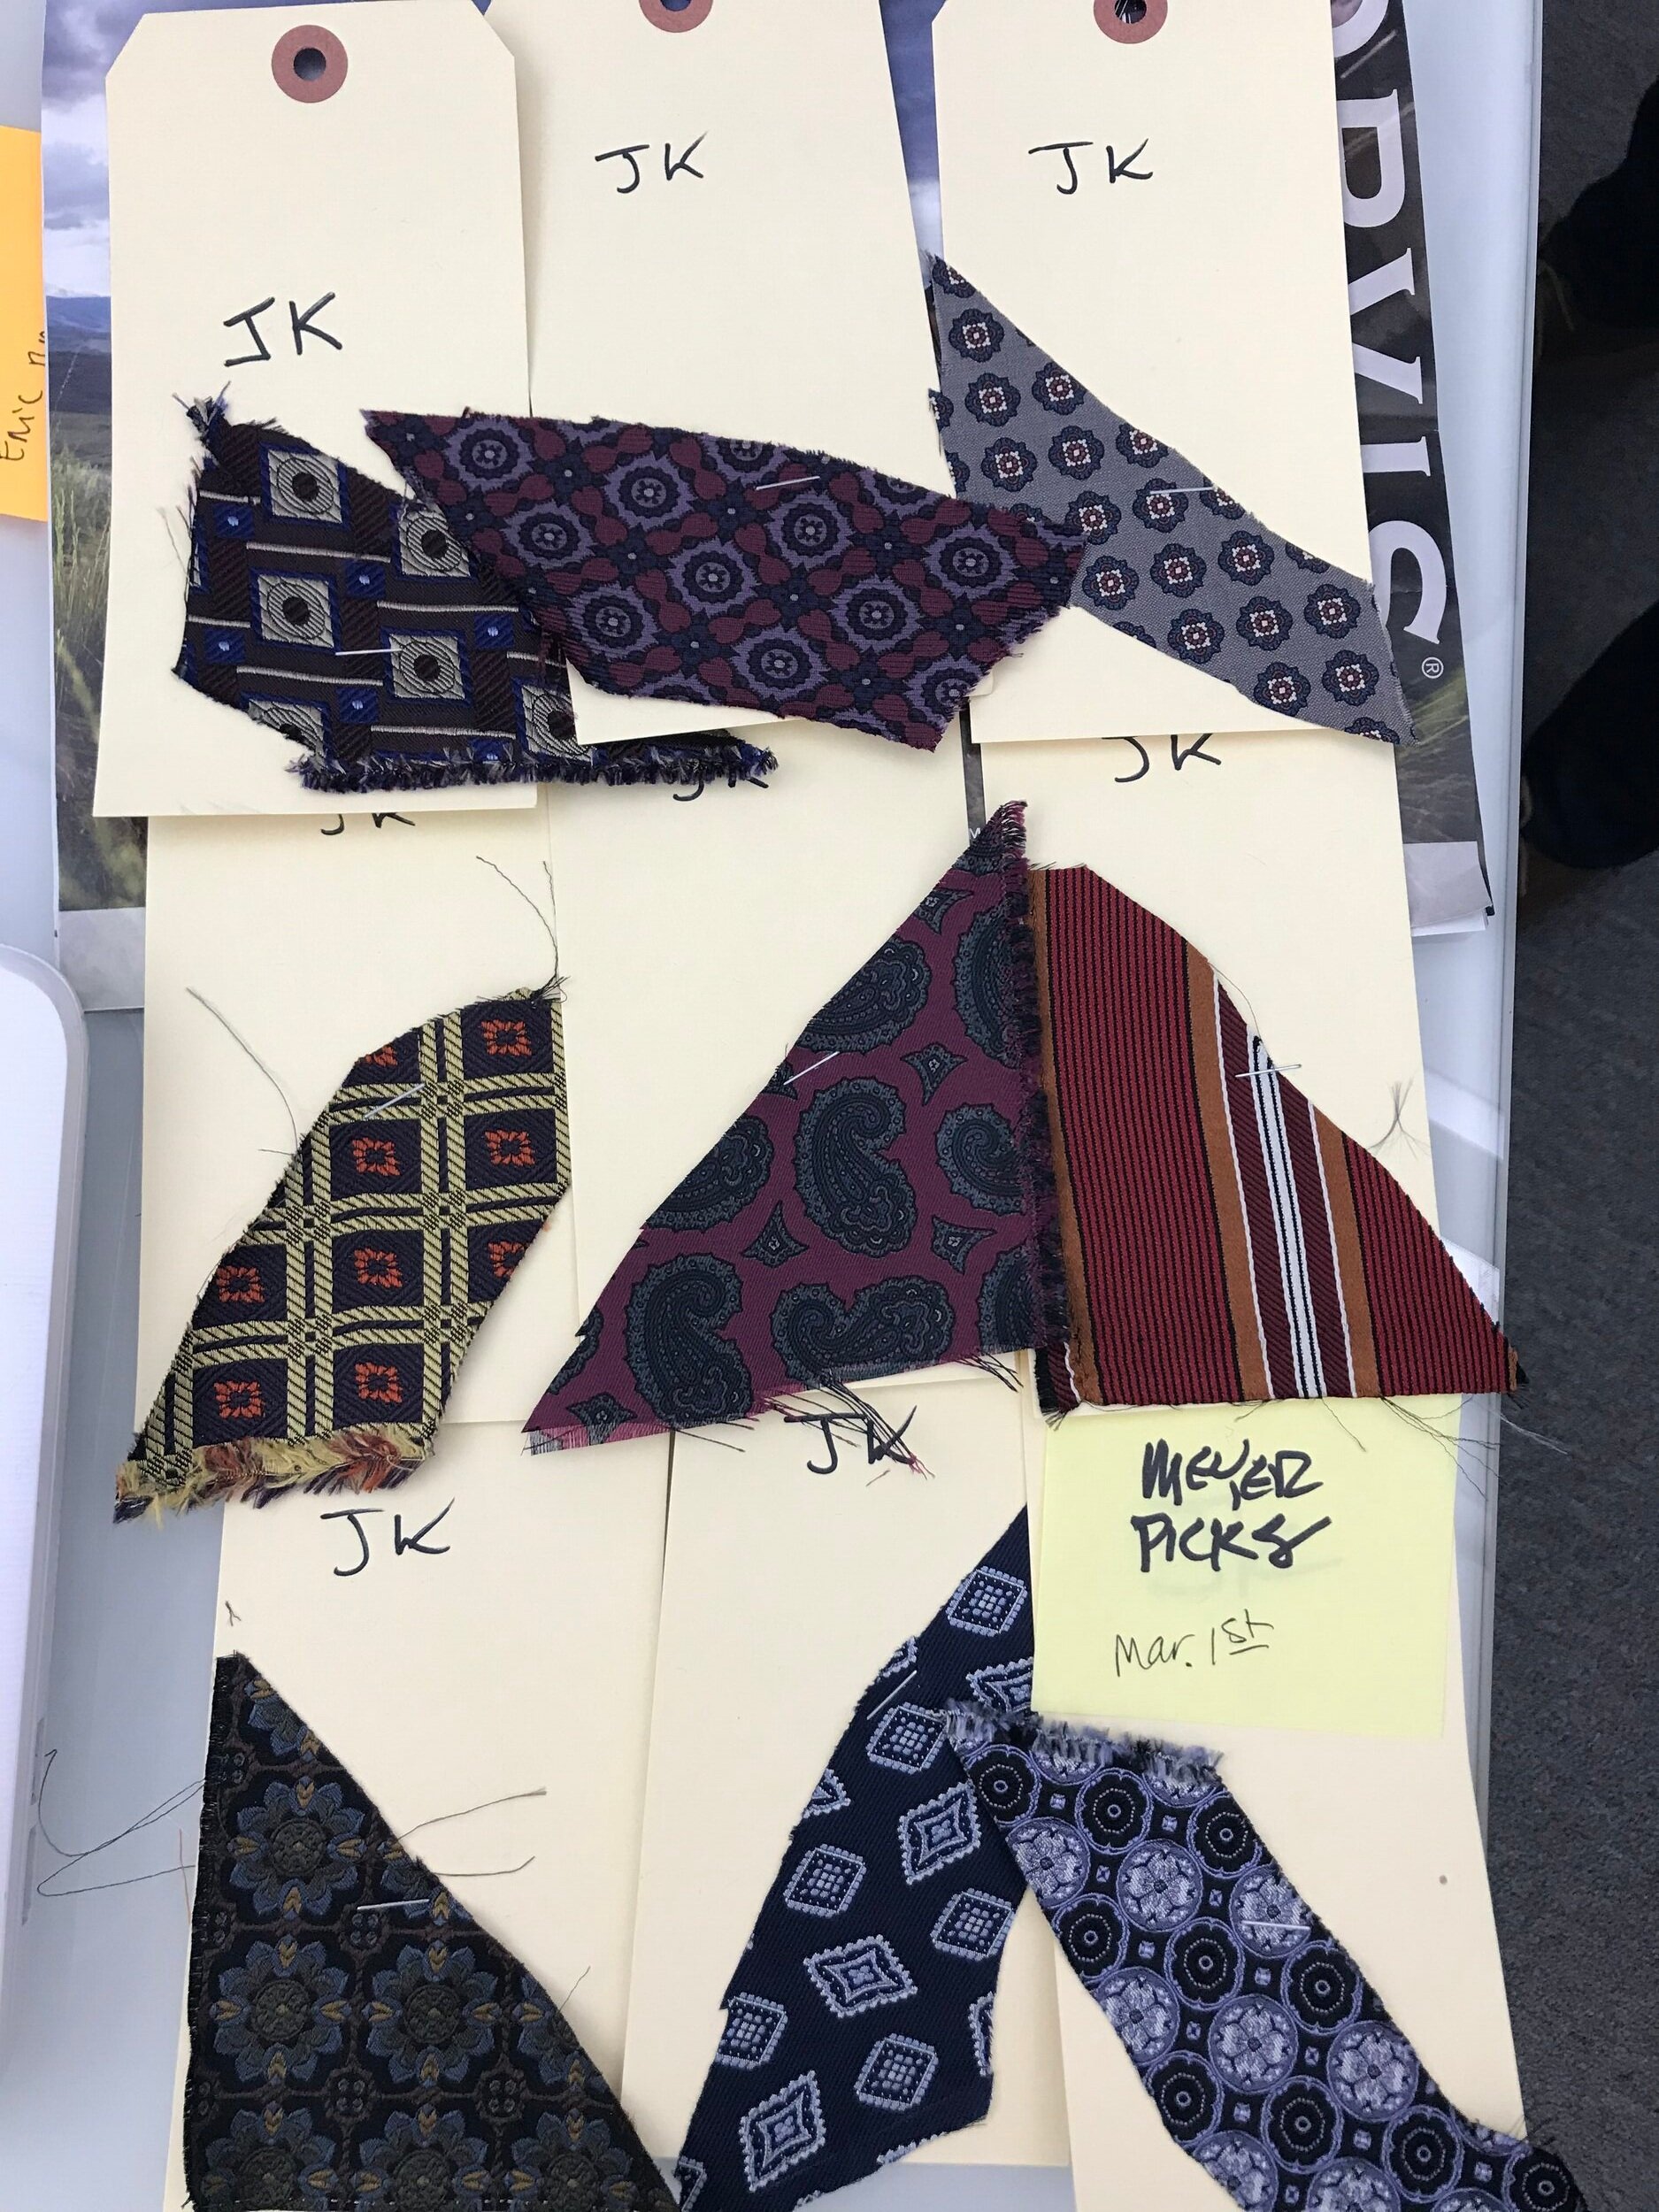 Swatches of tie fabrics built for "Meyer"